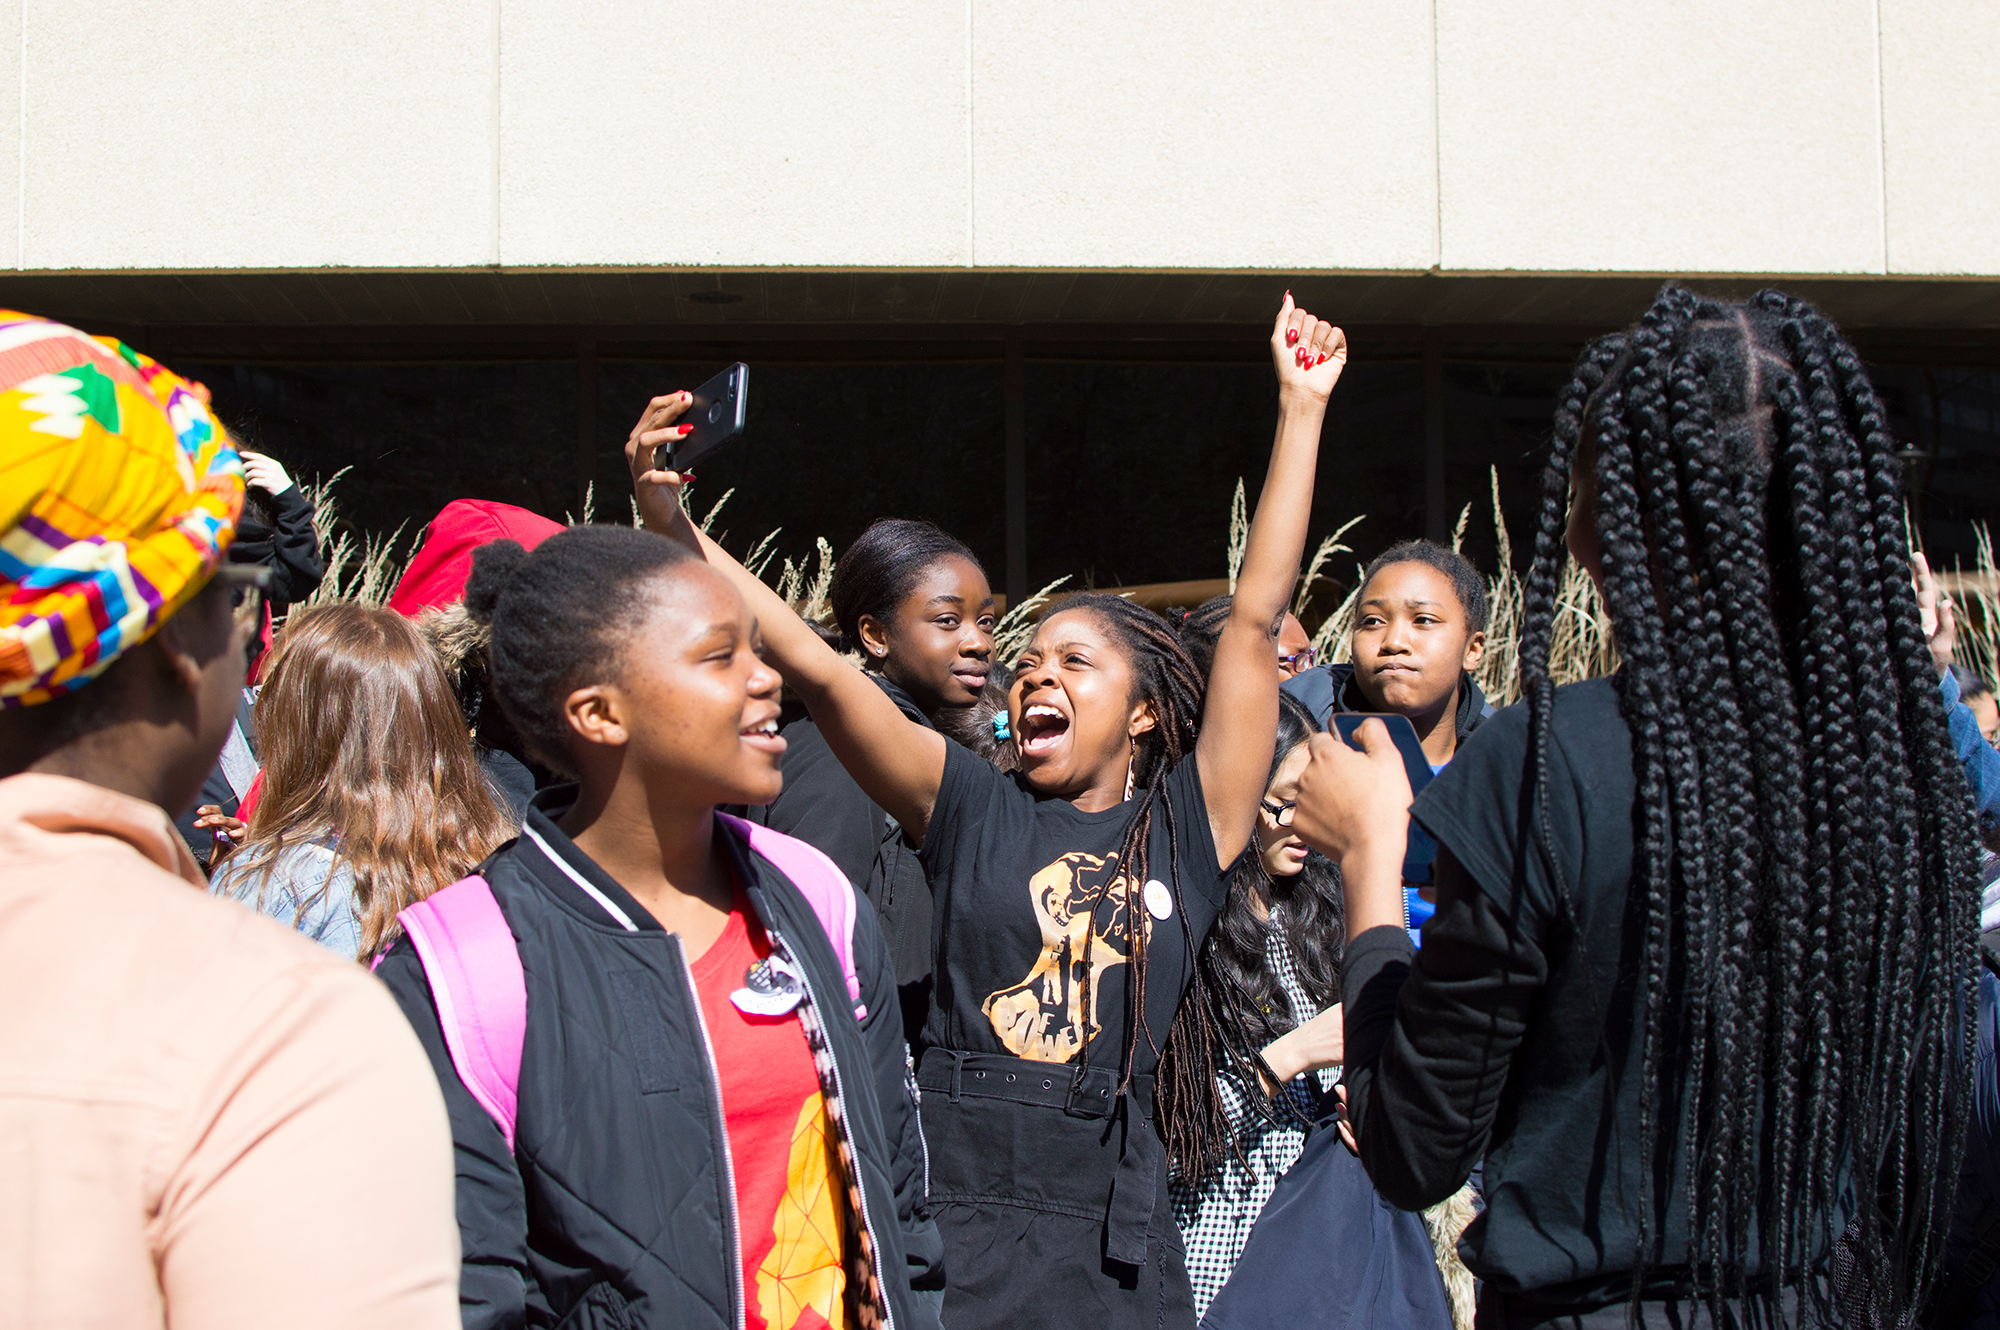 Founder Aisha Addo cheering with hands in the air and young Black girls surrounding her outside